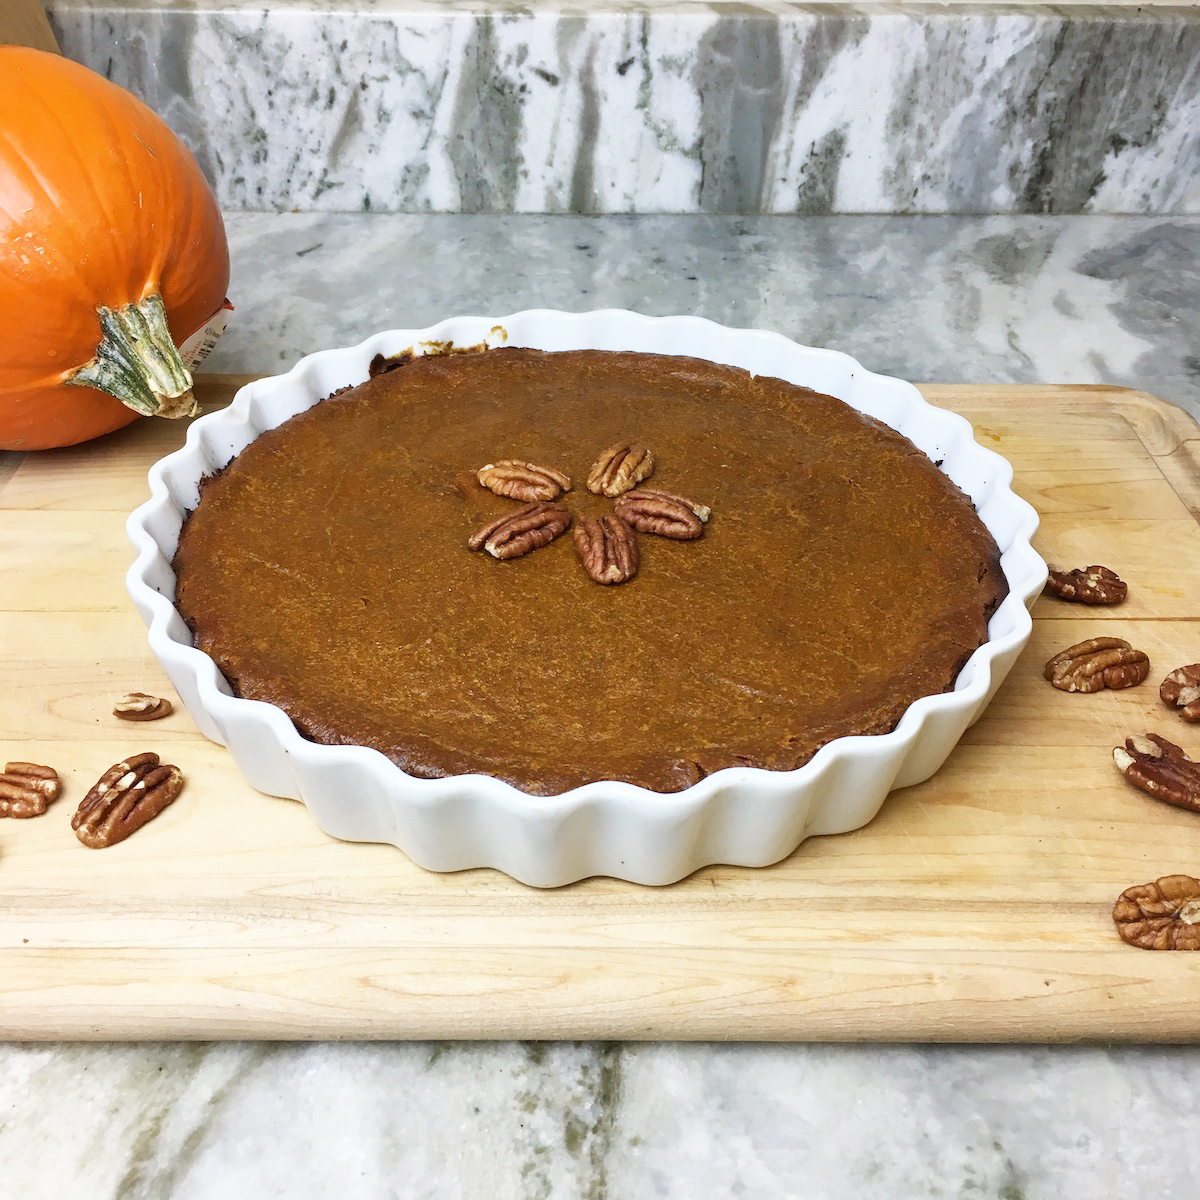 Vegan pumpkin pie ready for the holiday!